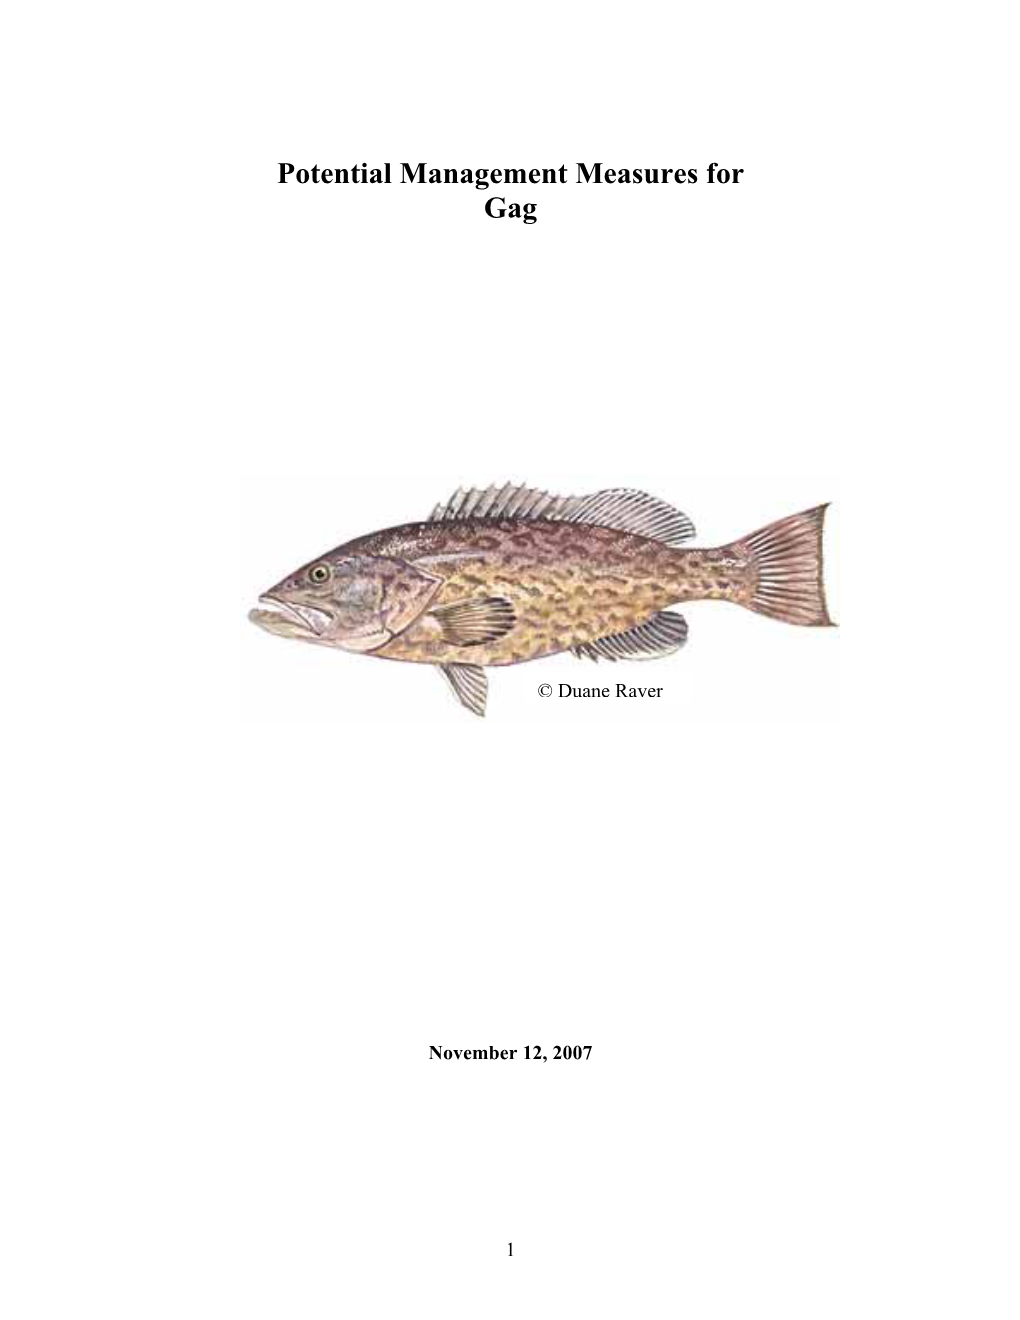 Snowy Grouper Landings – Pounds Whole Weight